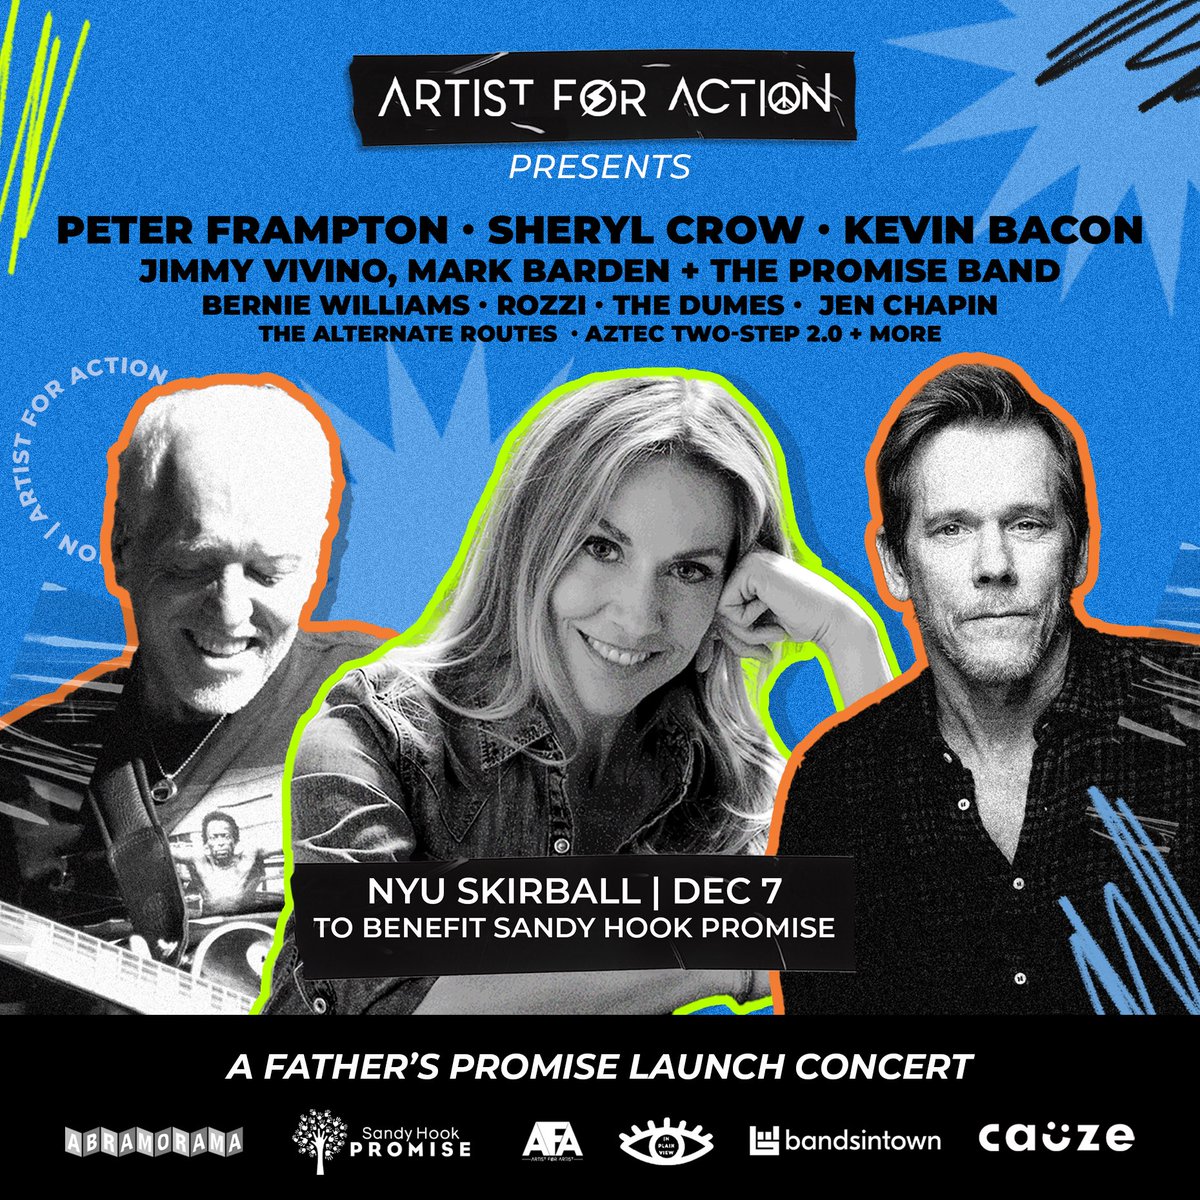 I am an Artist For Action. Join me in NYC @afaventures on Dec 7th for a special one night only concert that will benefit @sandyhook. Together we can #EndGunViolence. Limited tix avail: found.ee/nyutickets